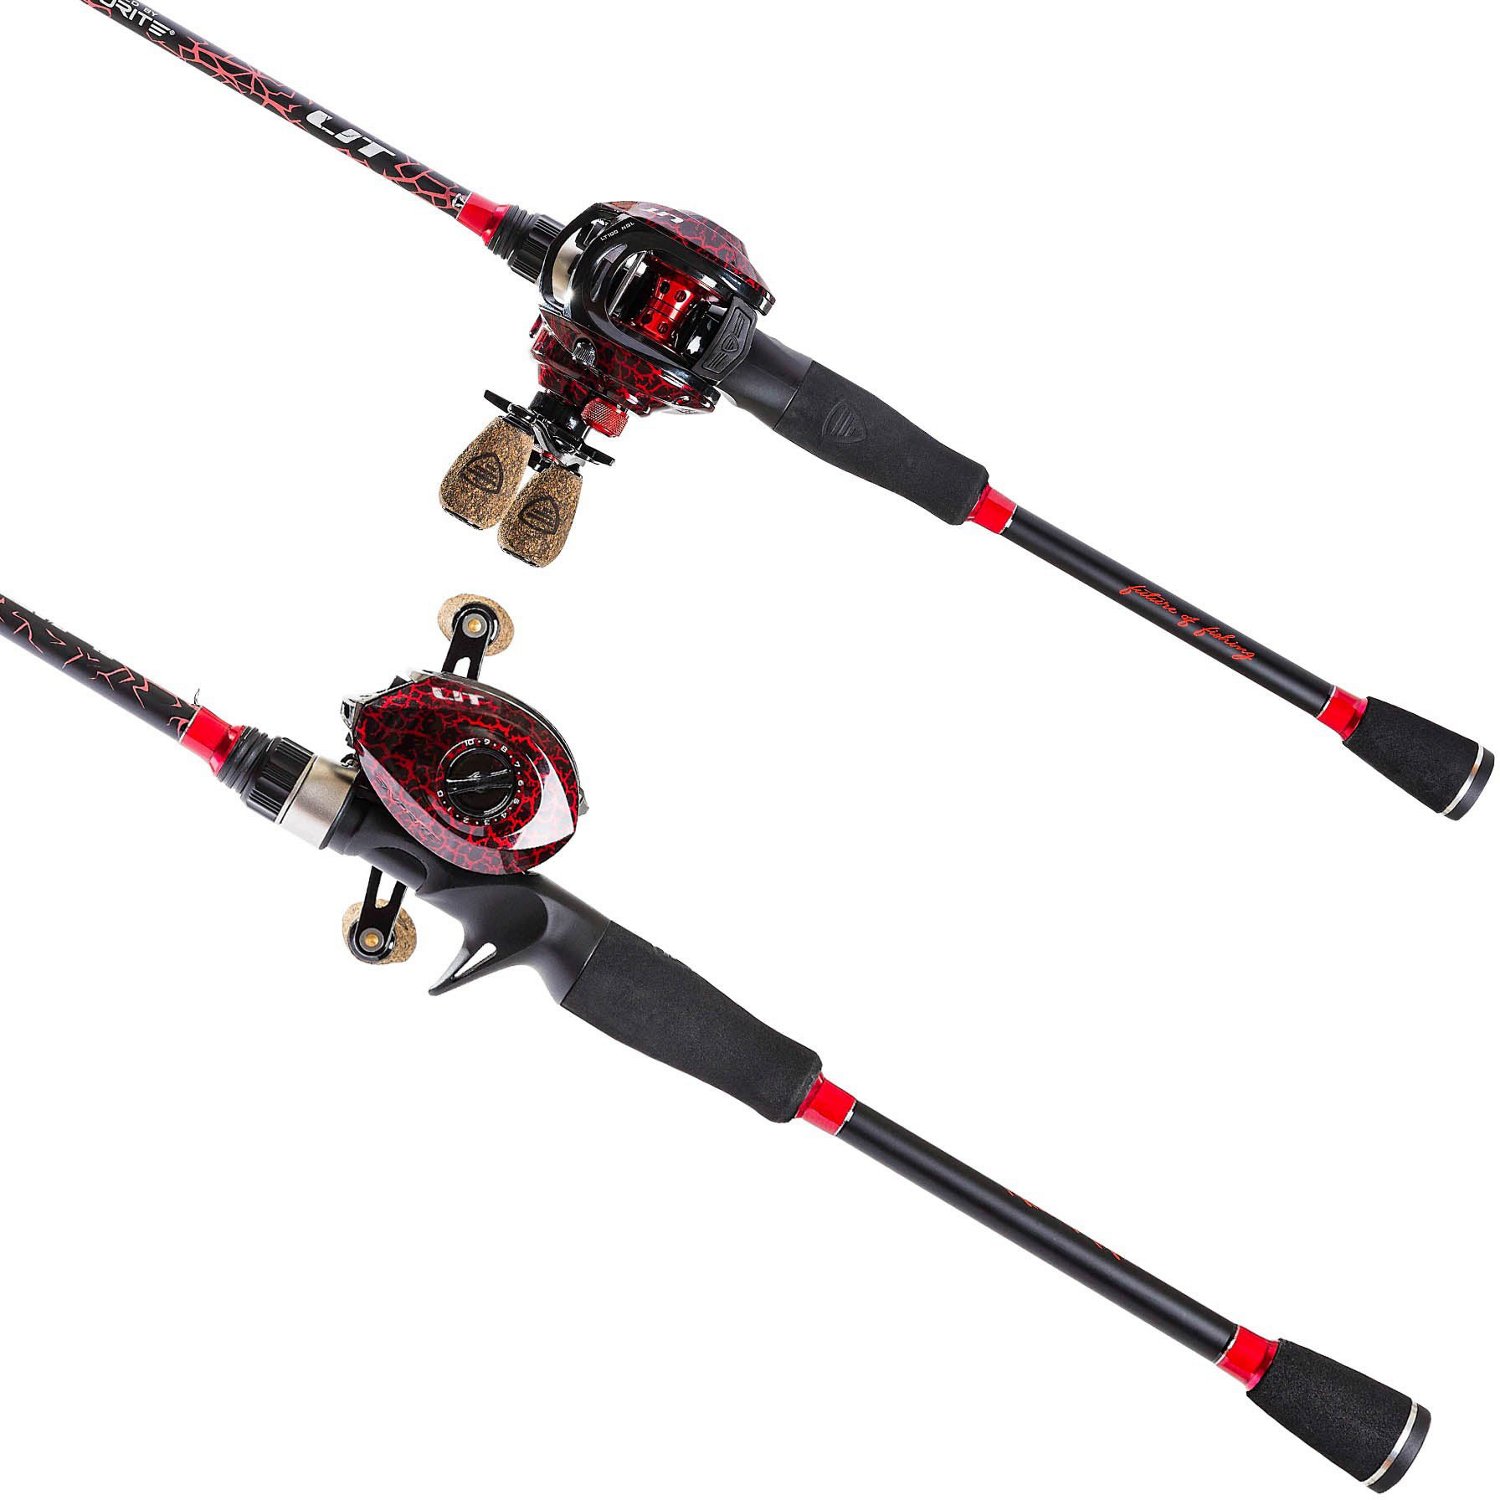 Favorite Fishing Lit 7 ft 3 in MH Baitcast Rod and Reel Combo